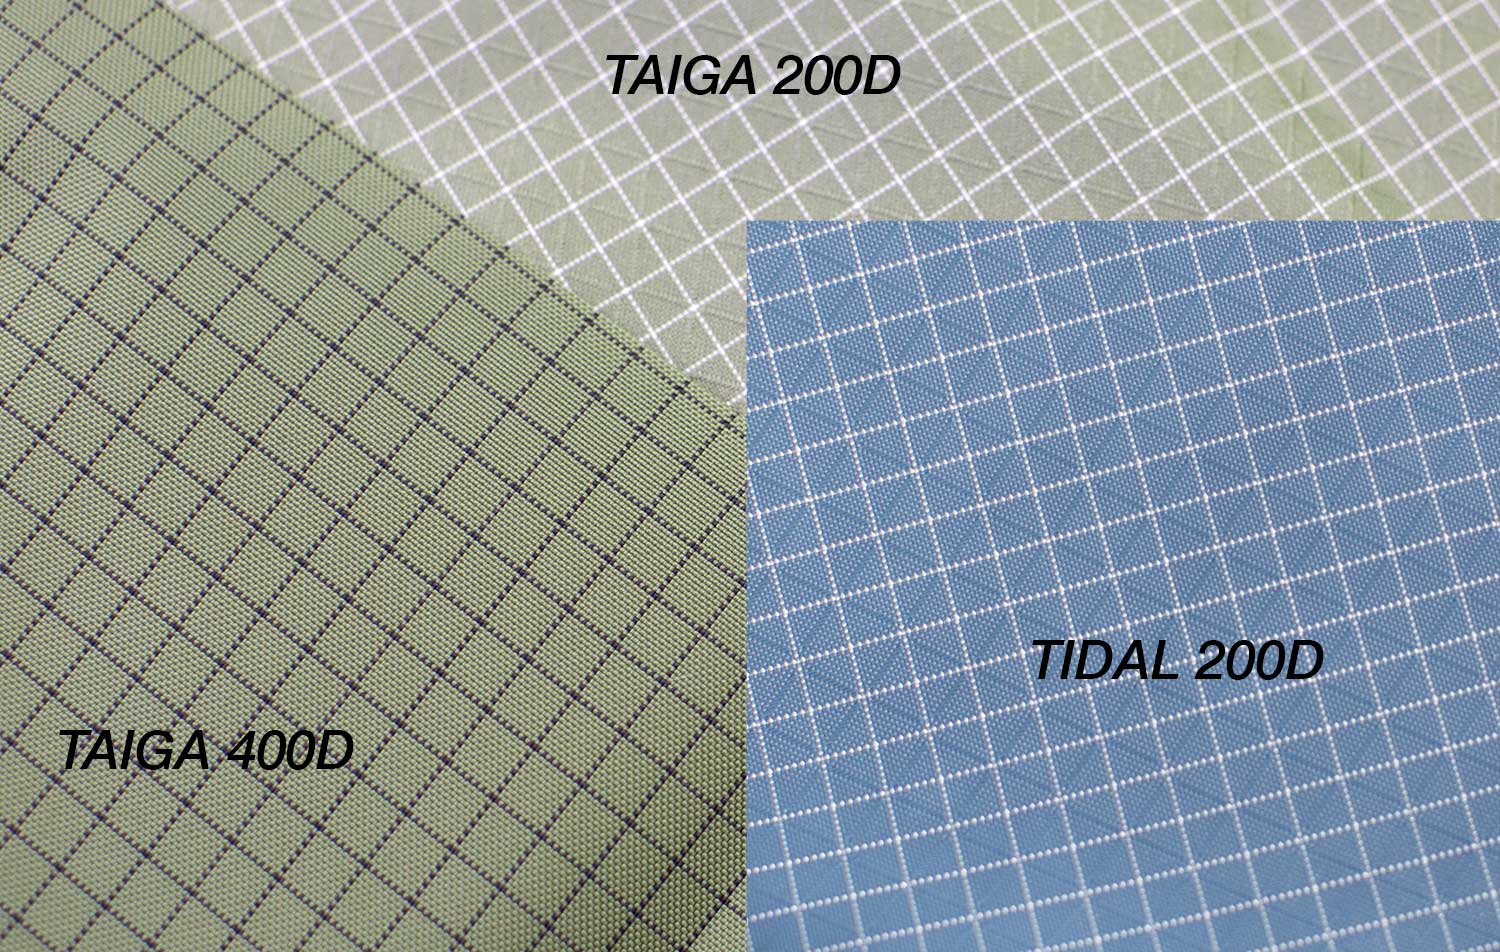 Swatches of the Taiga 200 (sage green with white grid), Taiga 400 (sage green with black grid) and Tidal 200 (denim blue with white grid) Halcyon fabrics.